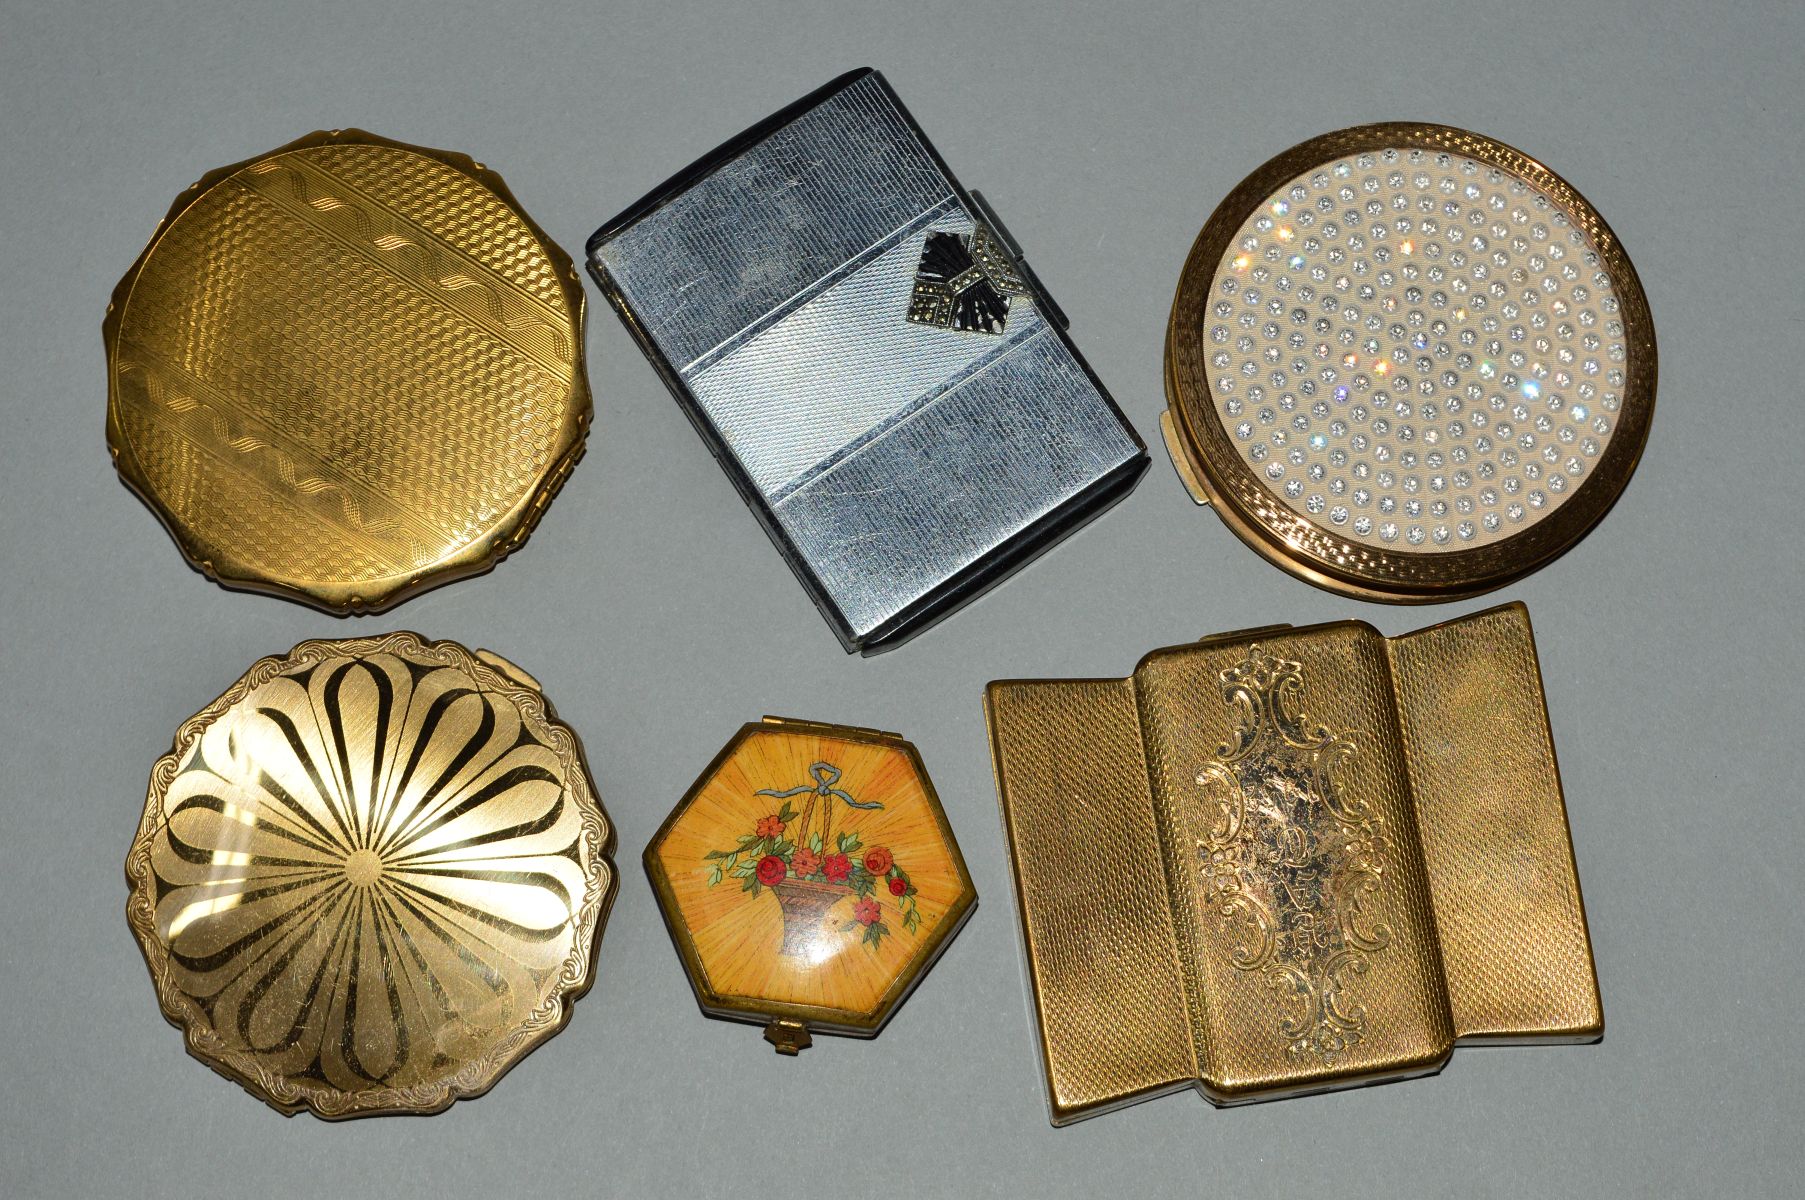 SIX VINTAGE COMPACTS, to include a personalised Volupte compact, two circular Stratton compacts, a